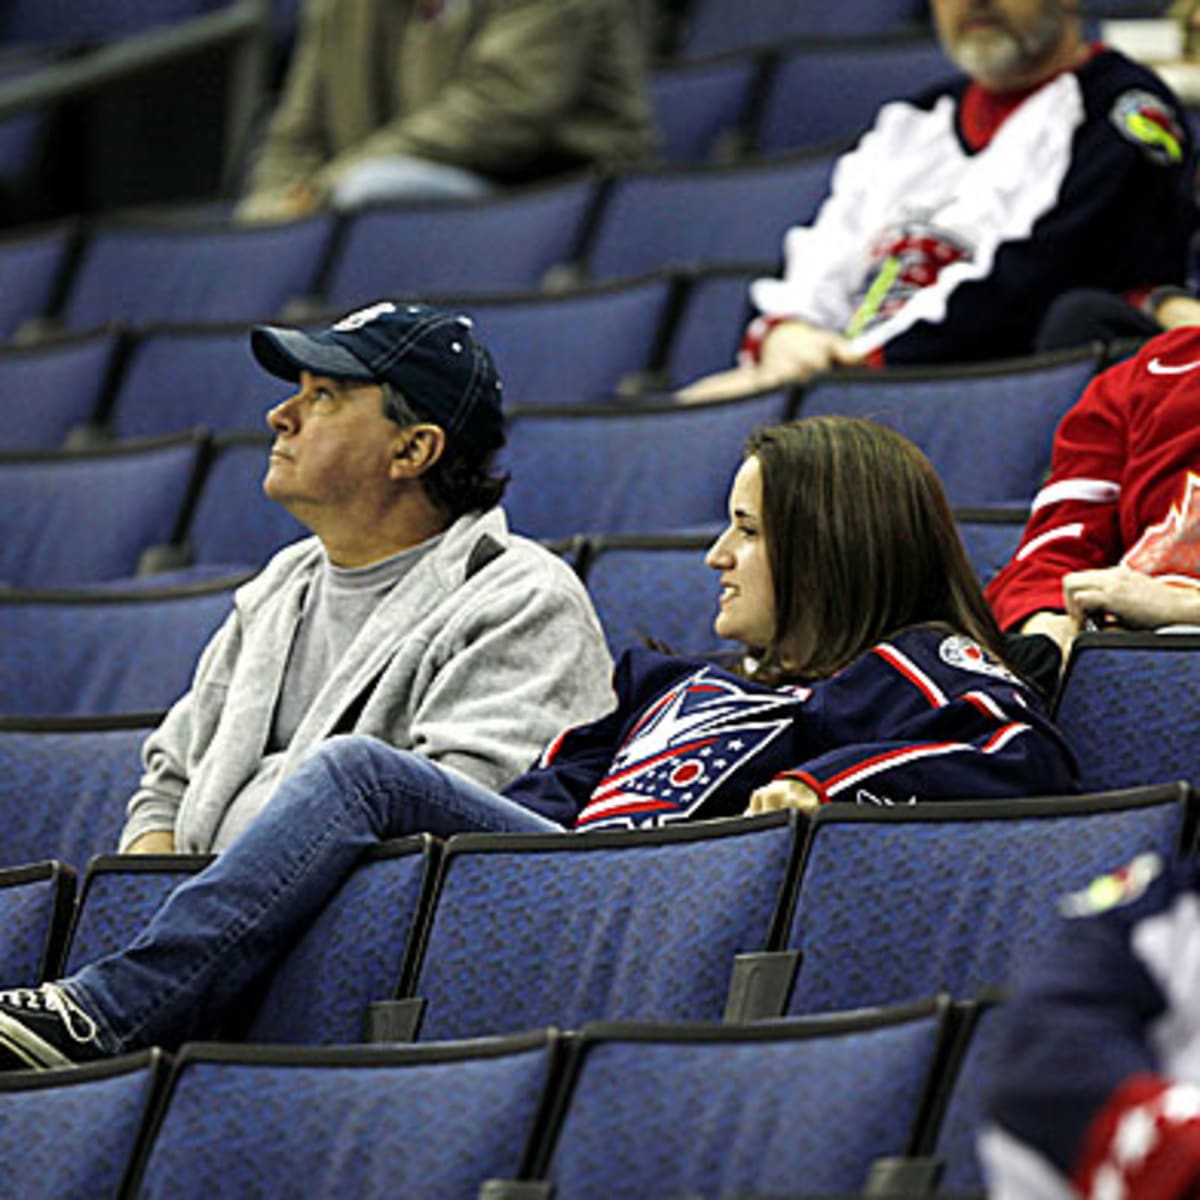 Blue Jackets' Fans Already Coping With Another Awful Season